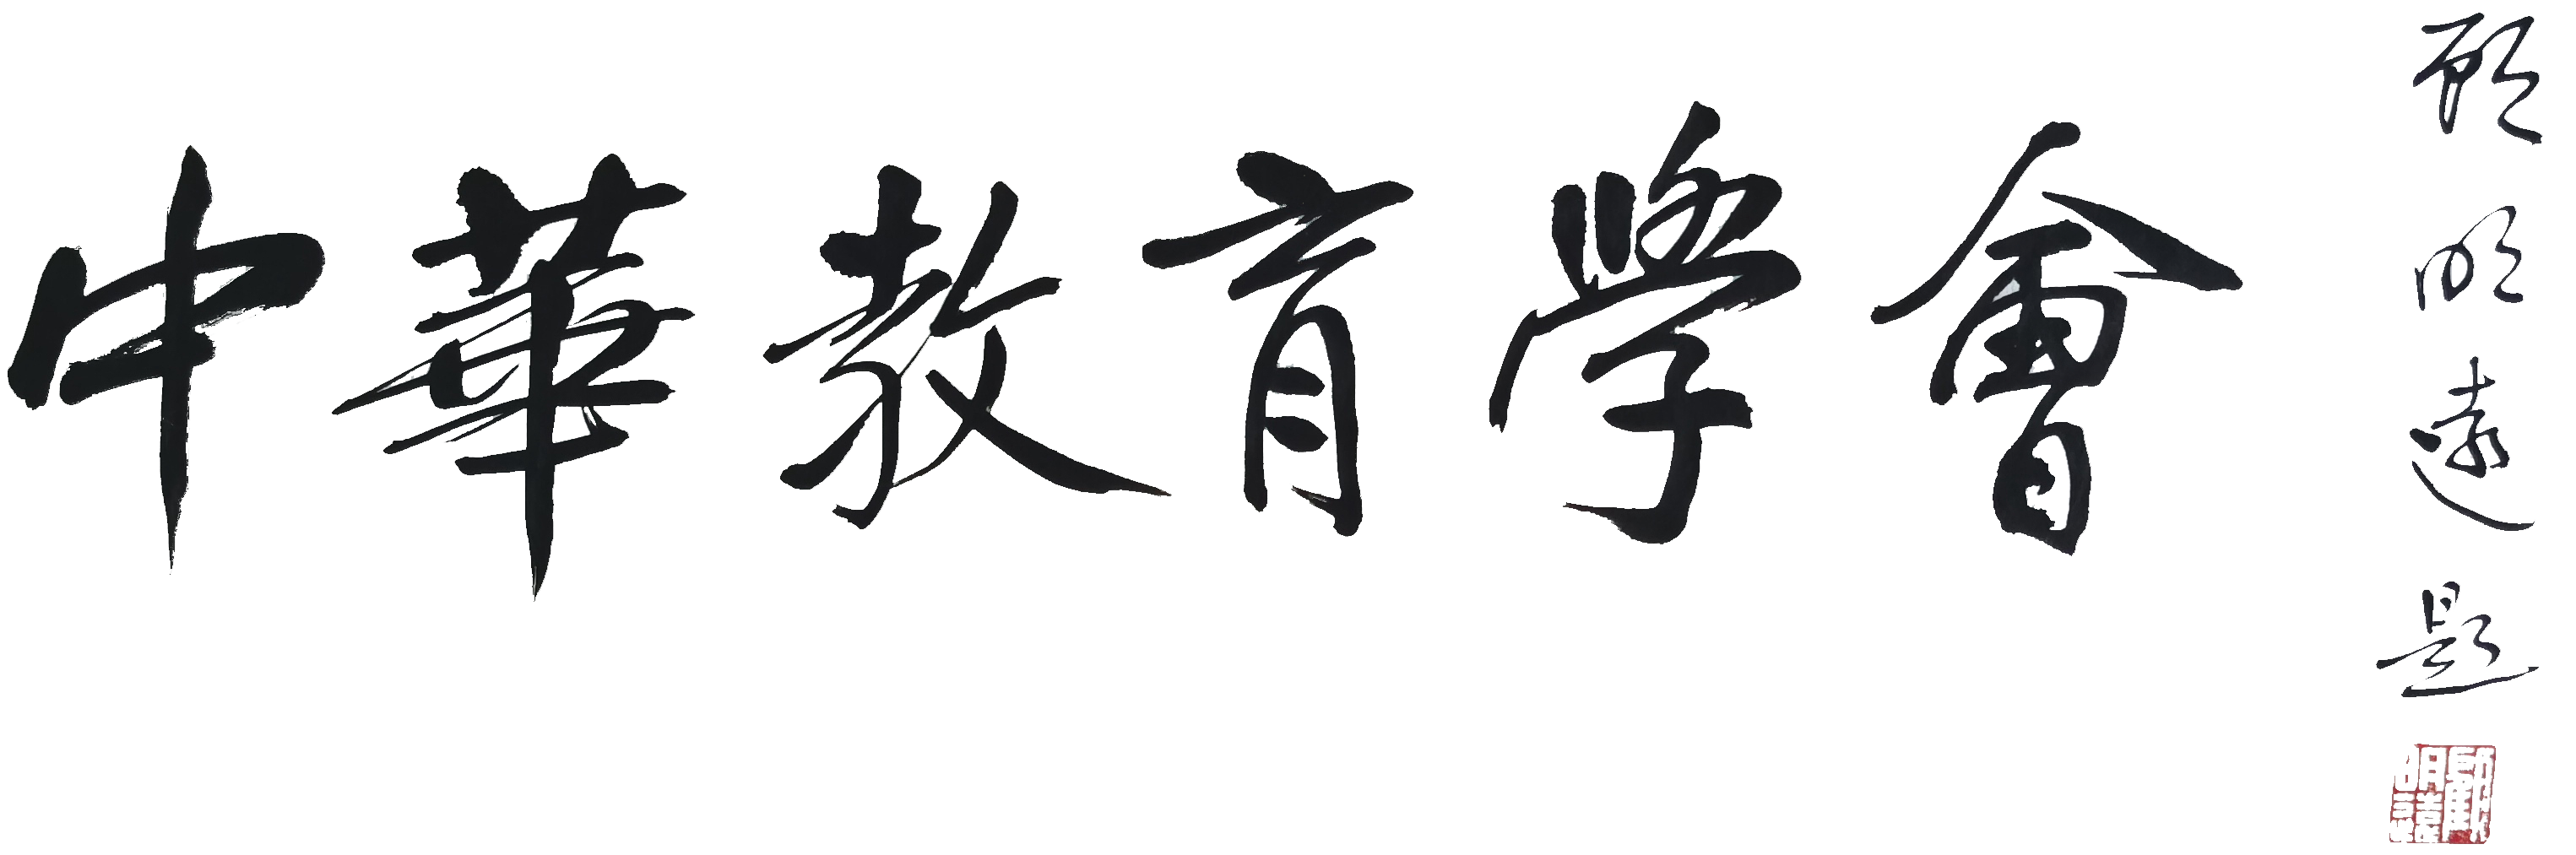 cse-chinese-calligraphy_240408.png